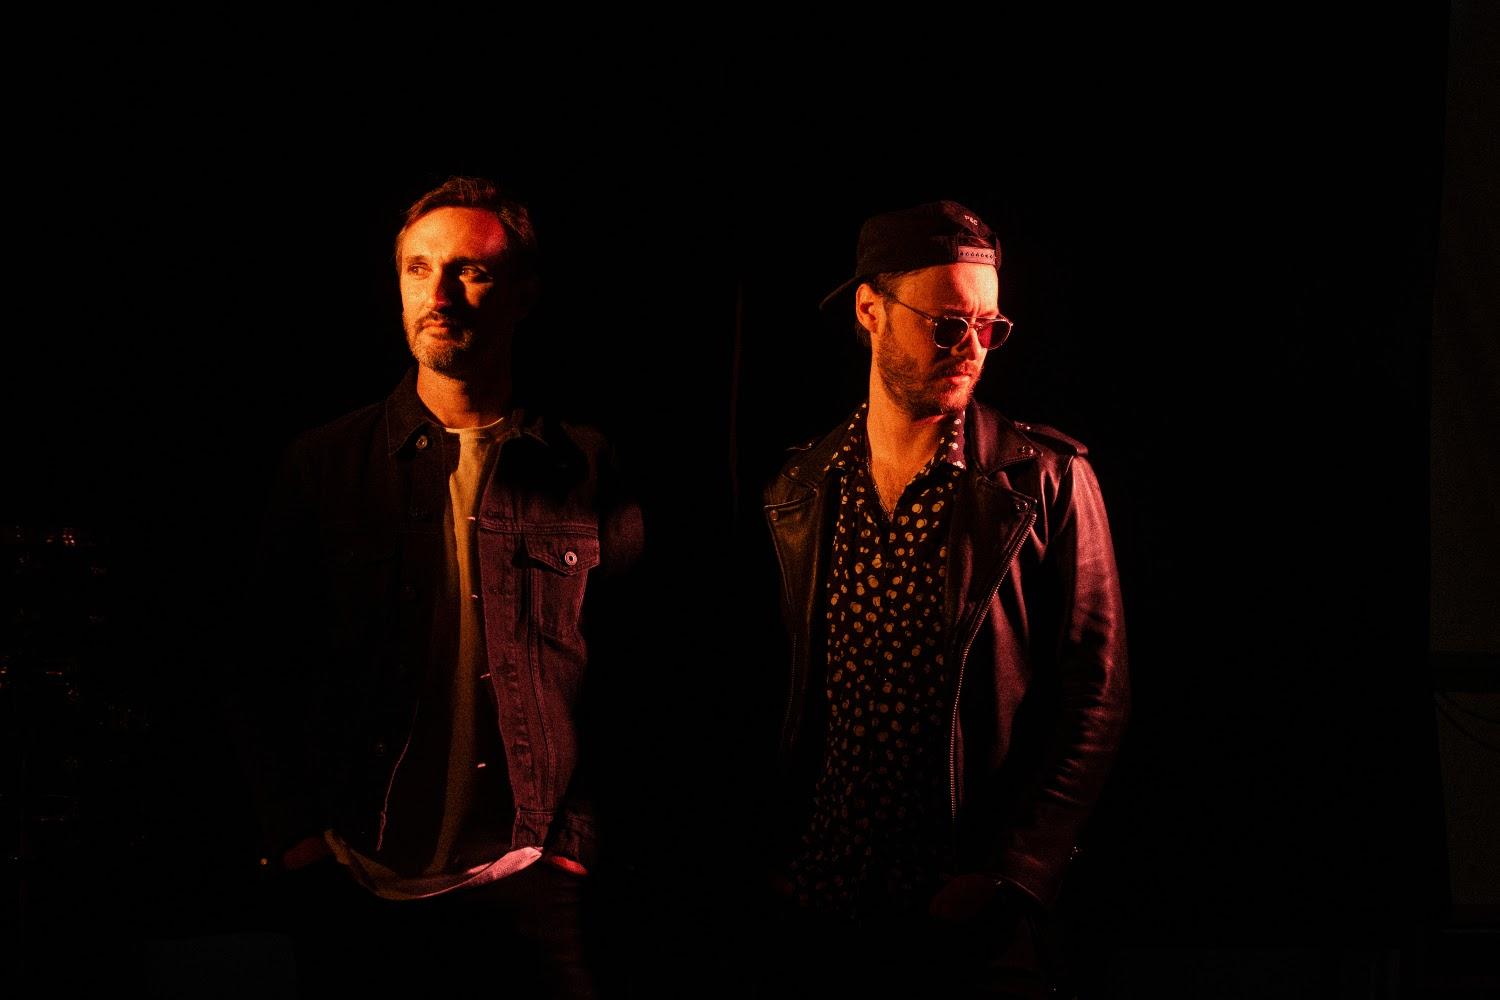 Two band members standing next to each other in a dark room with dim red lights